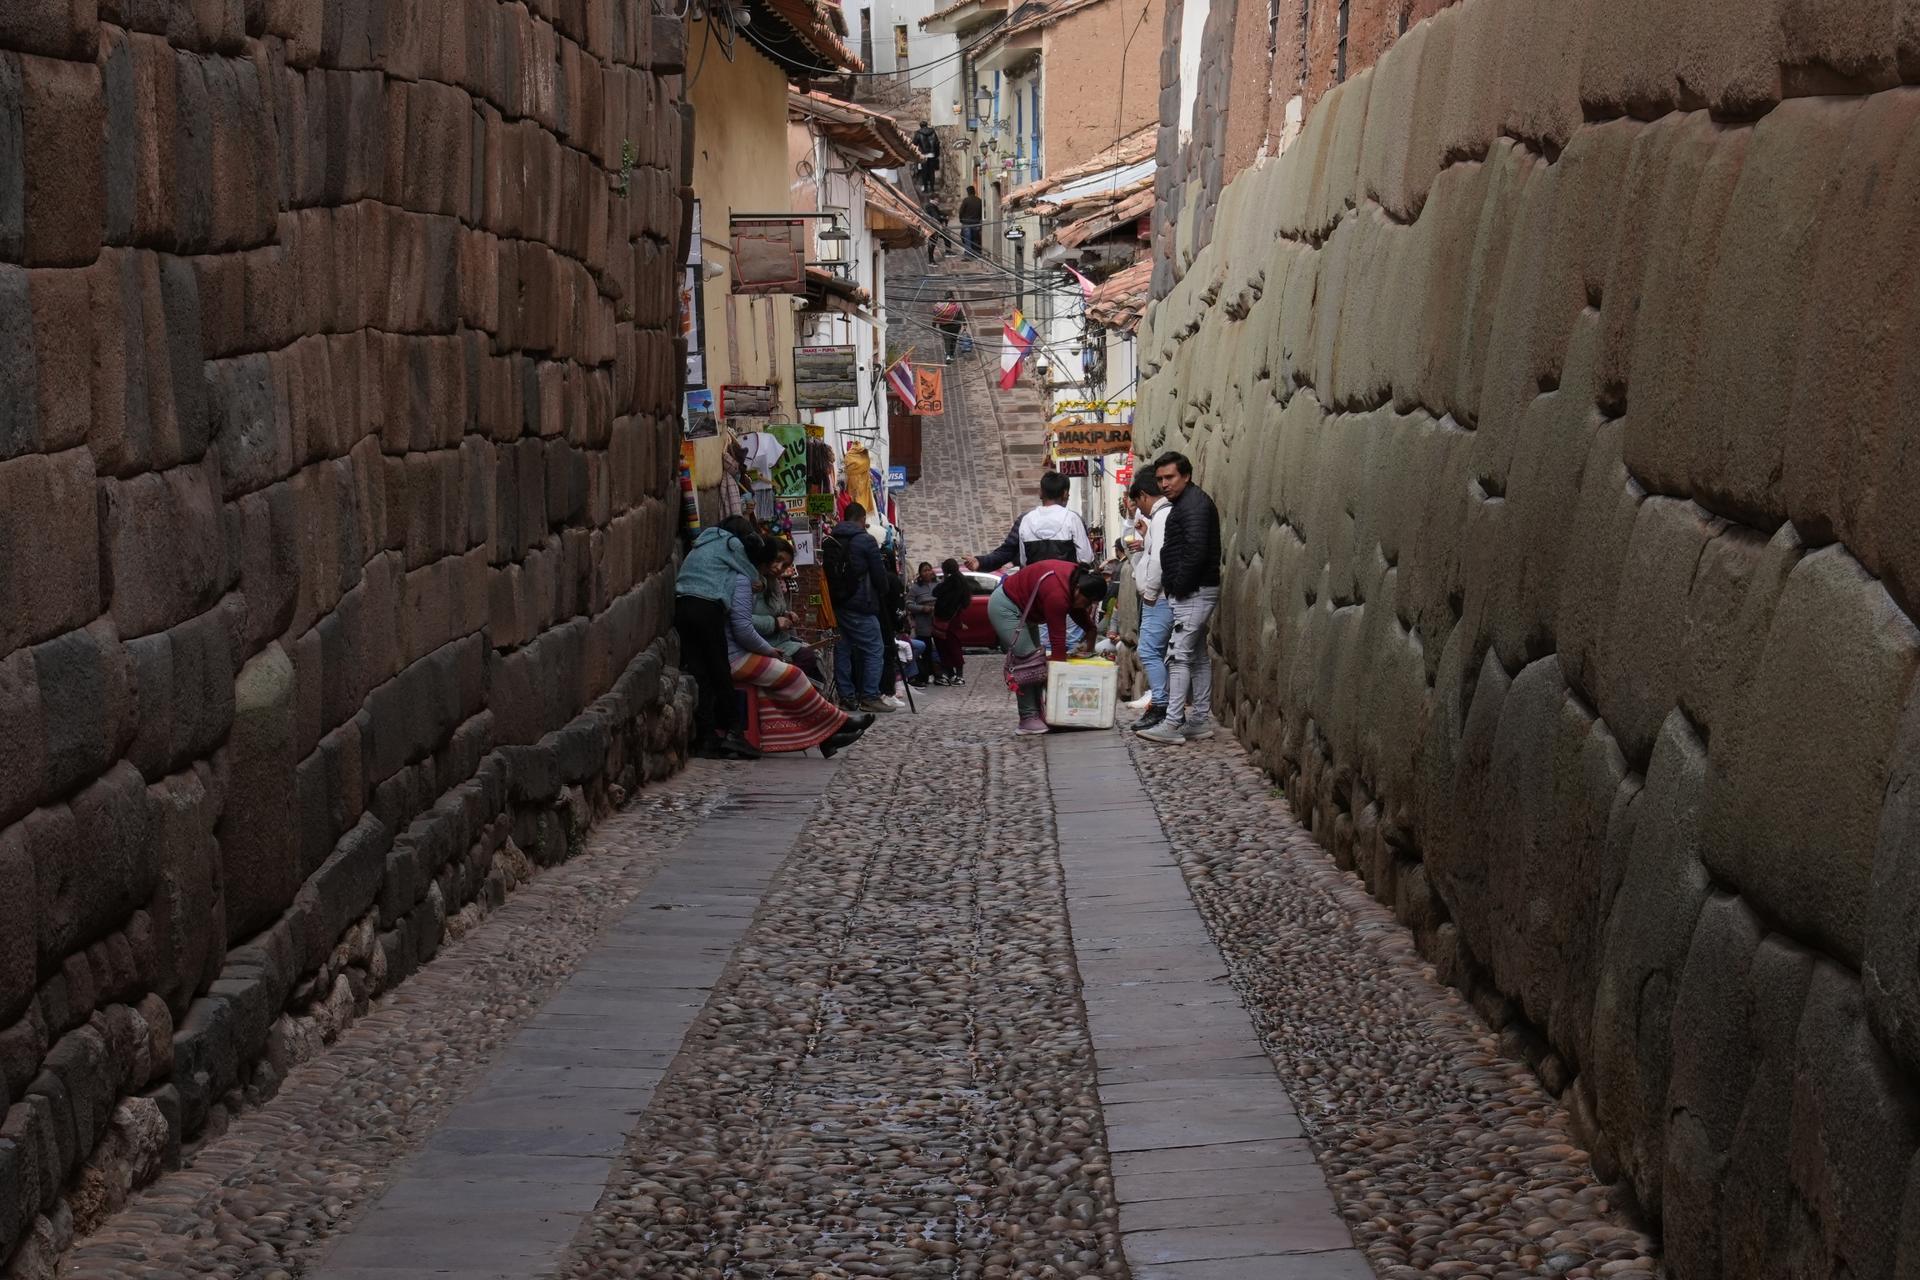 The streets in Cuzco are lined with walls that date back to the Inca empire.